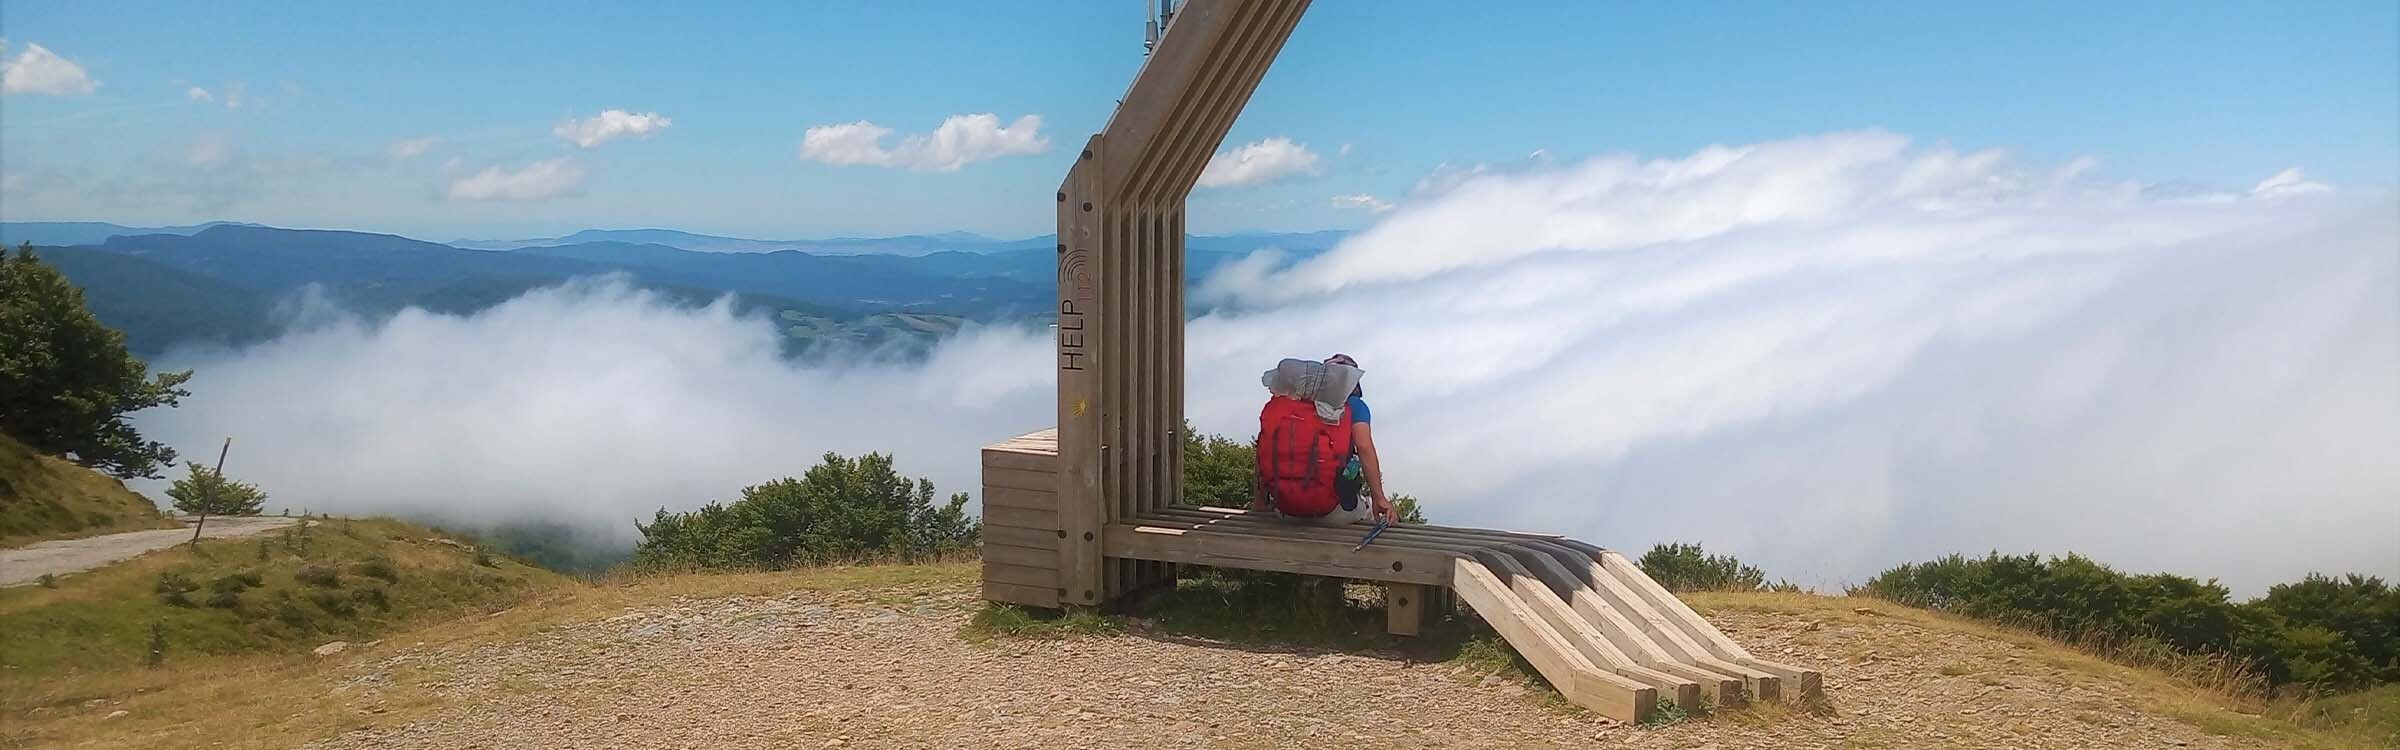 Resting spot on the Camino